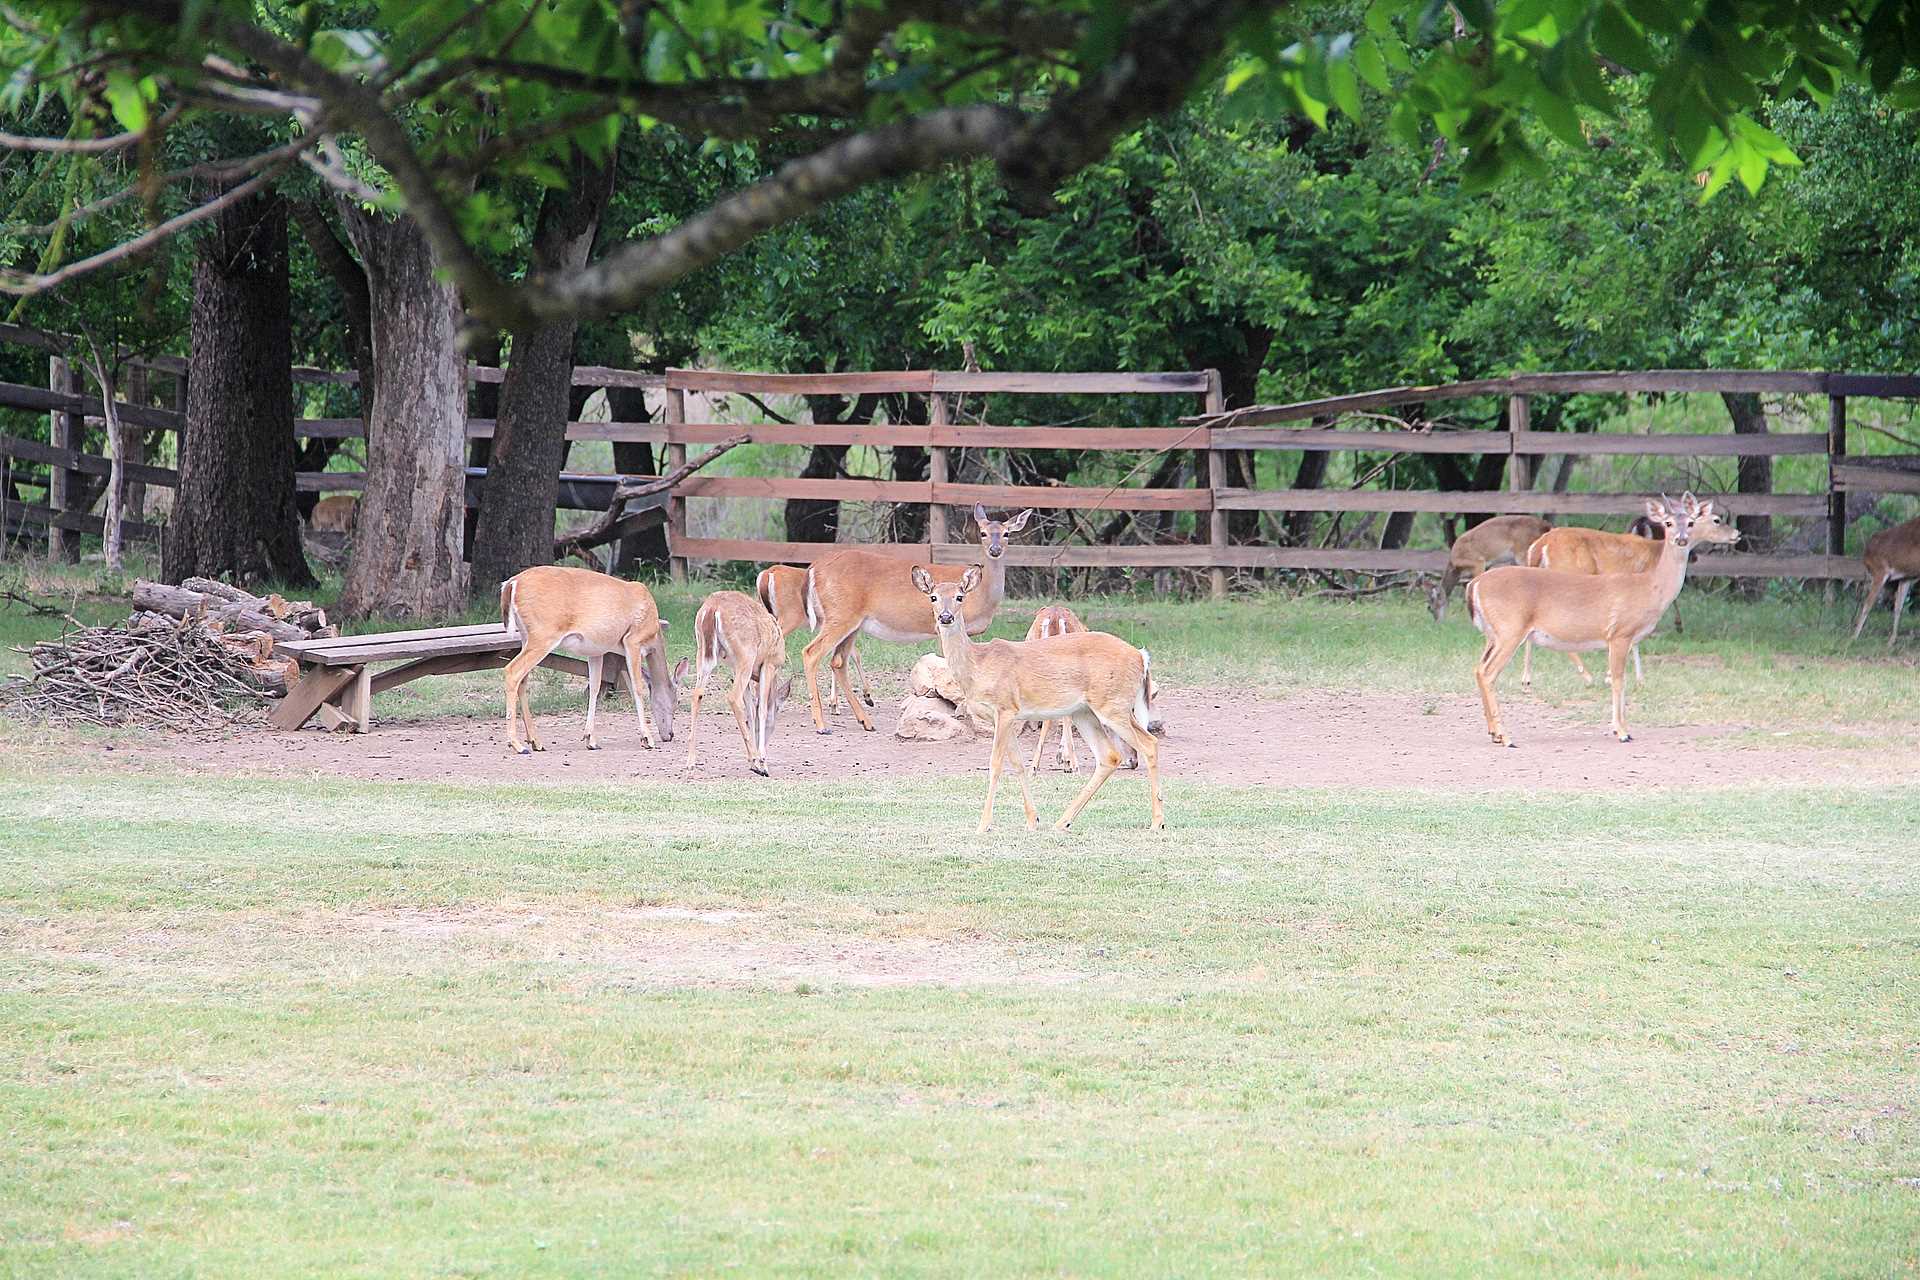                                                 The Double U Barr Ranch is a deer-friendly space, and they often stop by, to the delight of our guests!